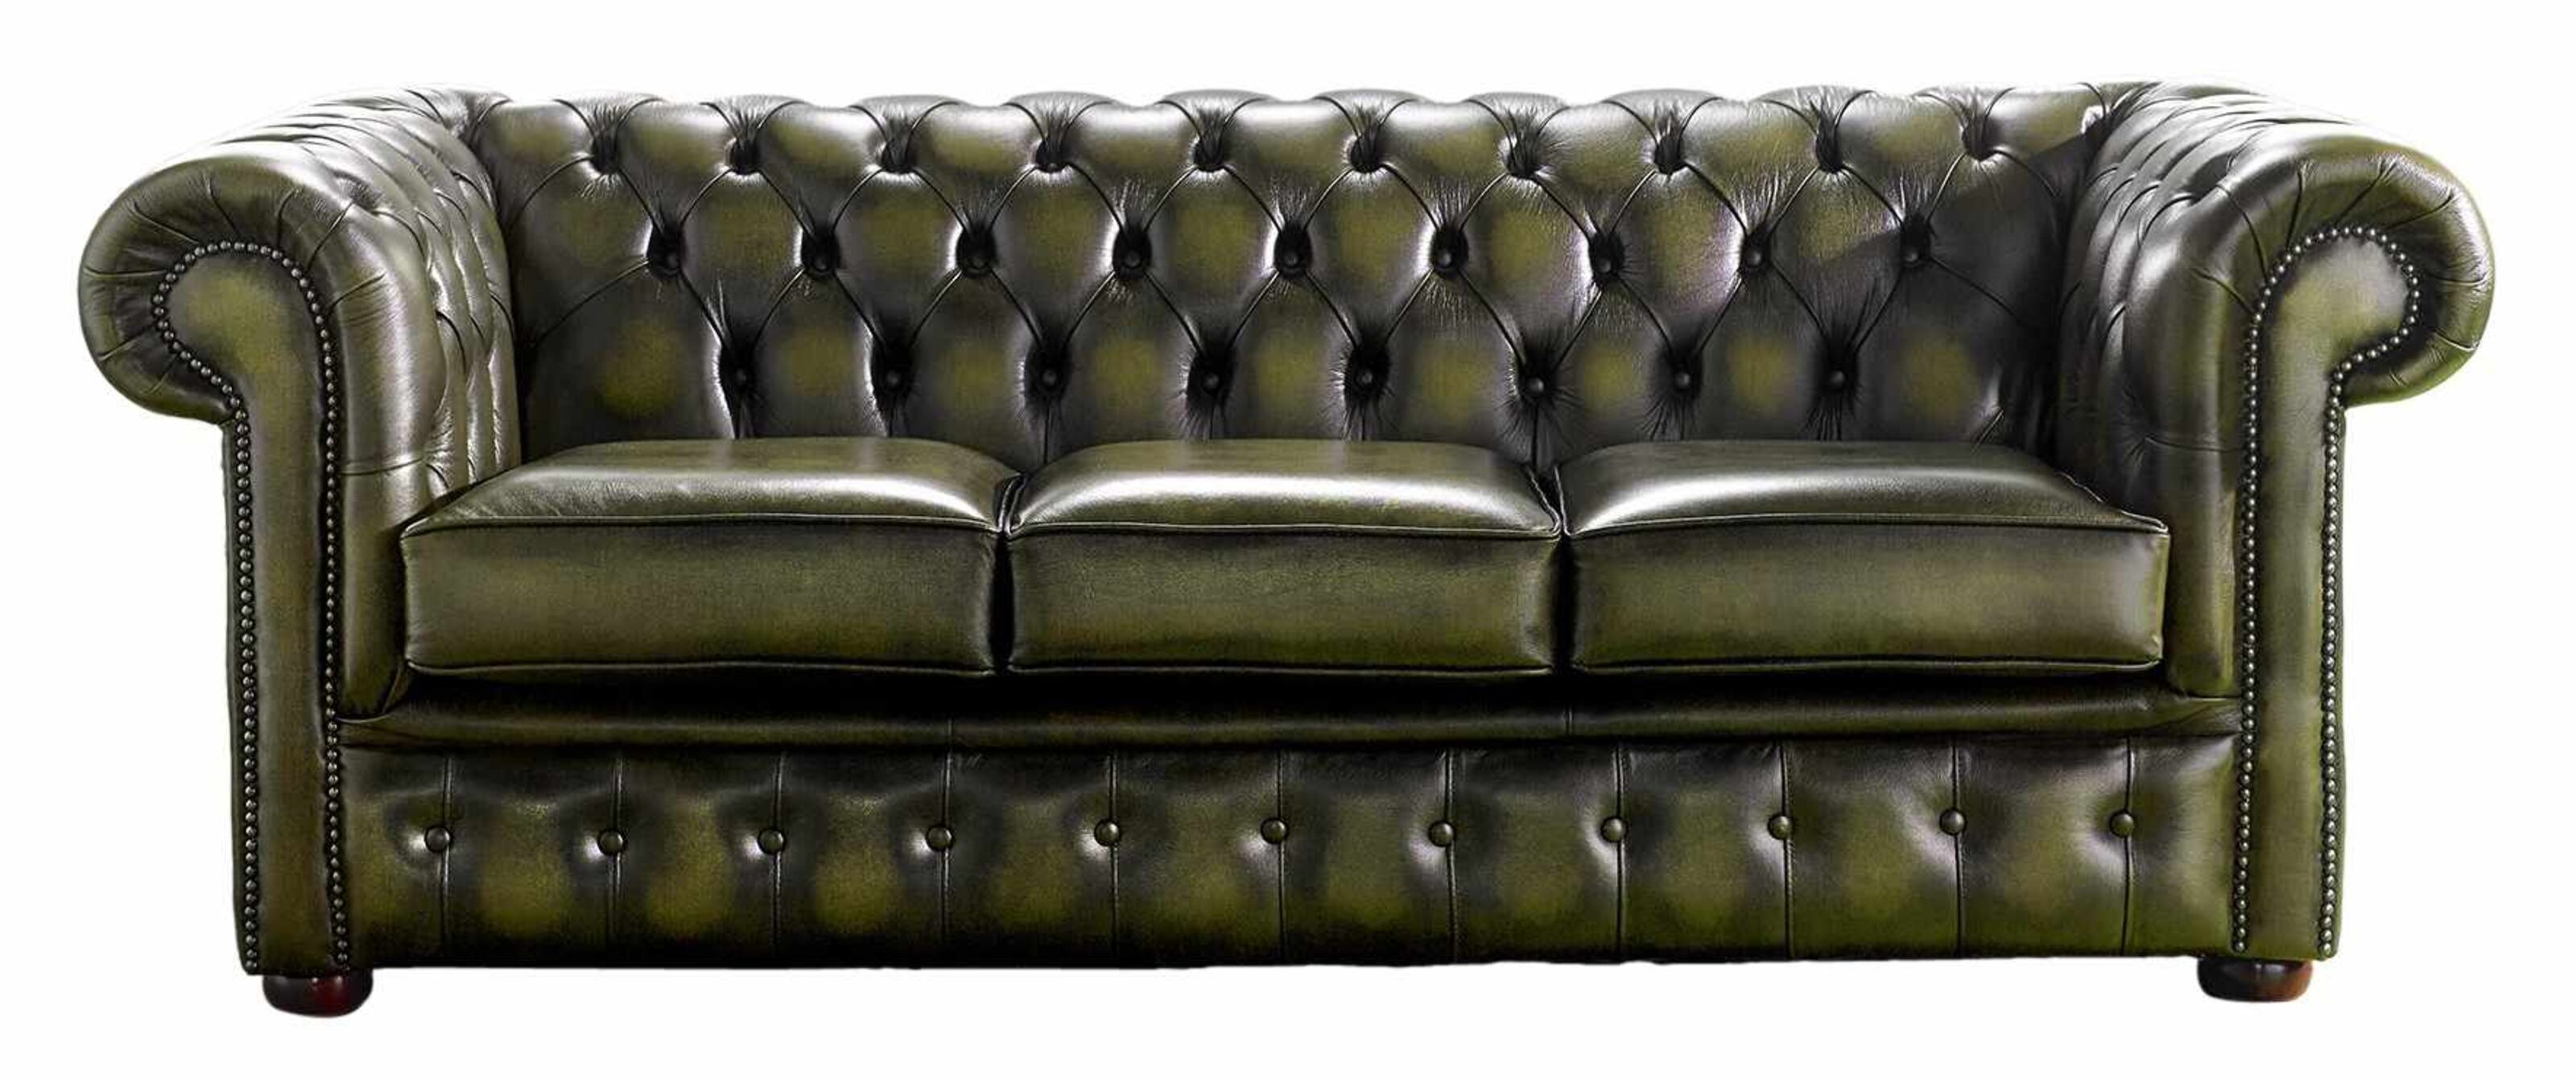 Exploring Nearby Chesterfield Furniture Options Your Local Source for Classic Elegance  %Post Title